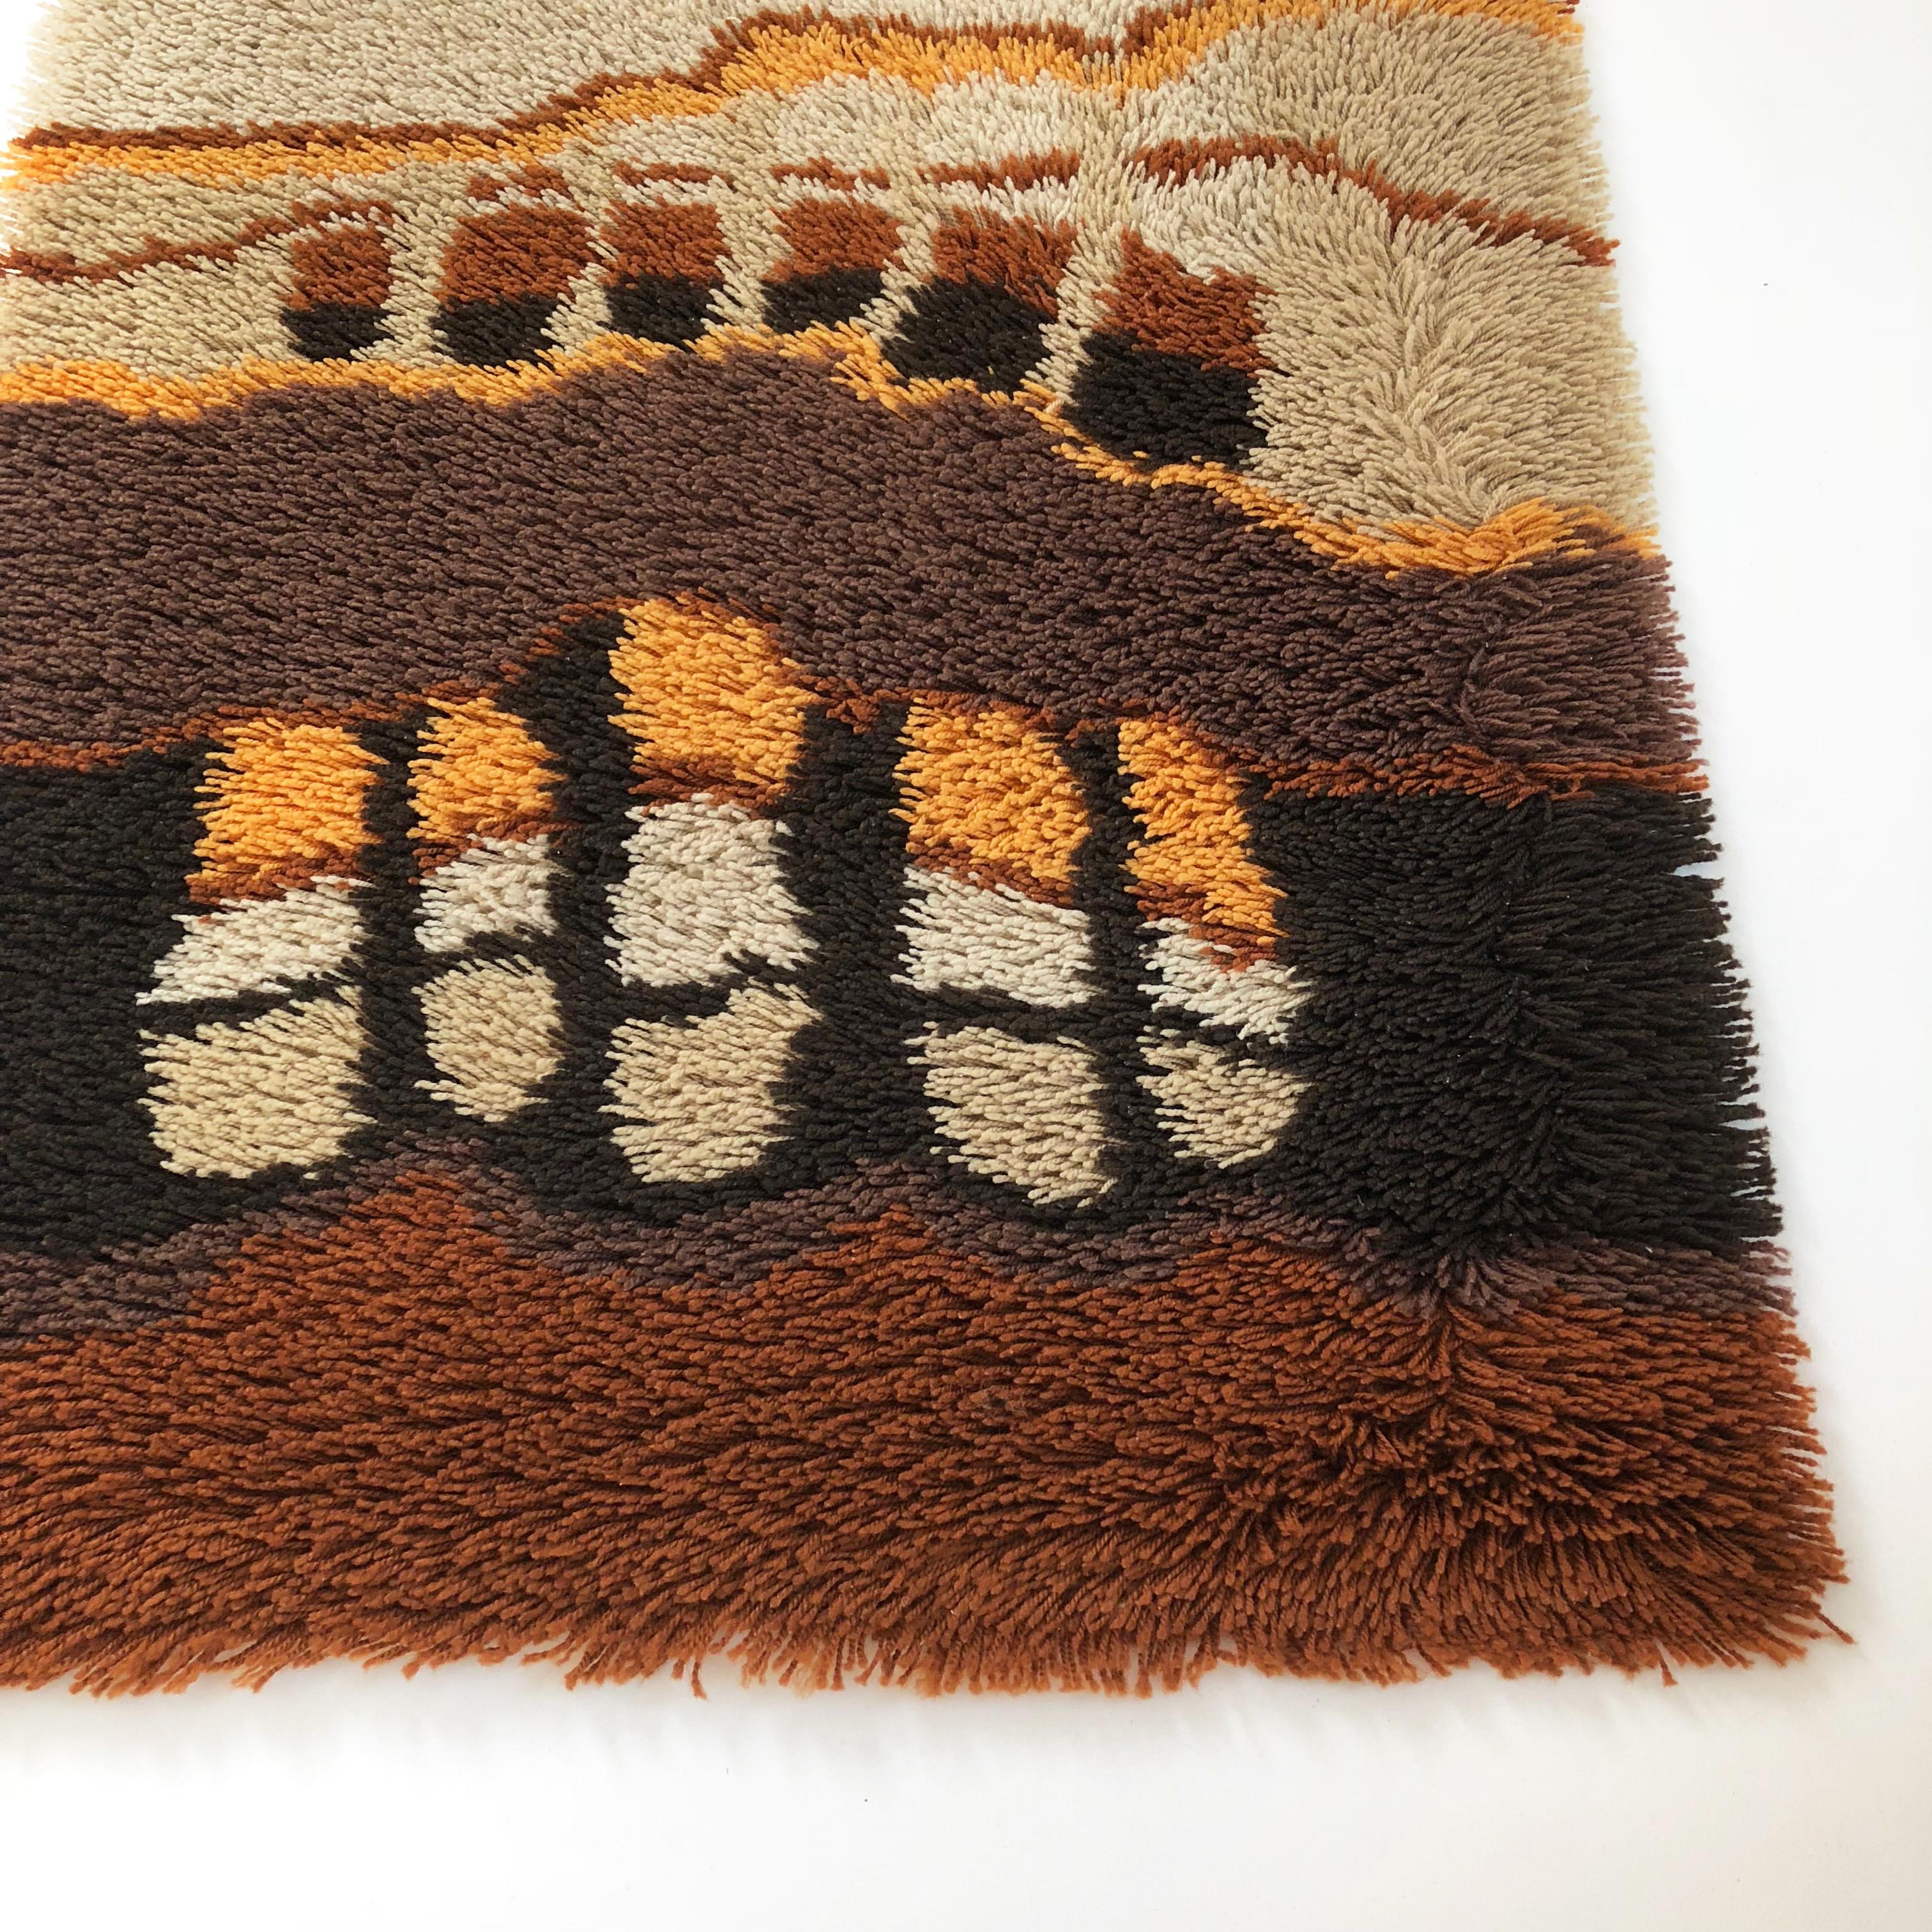 Dutch Small 1970s Modernist Multi-Color High Pile Rya Rug by Desso, Netherlands No. 2